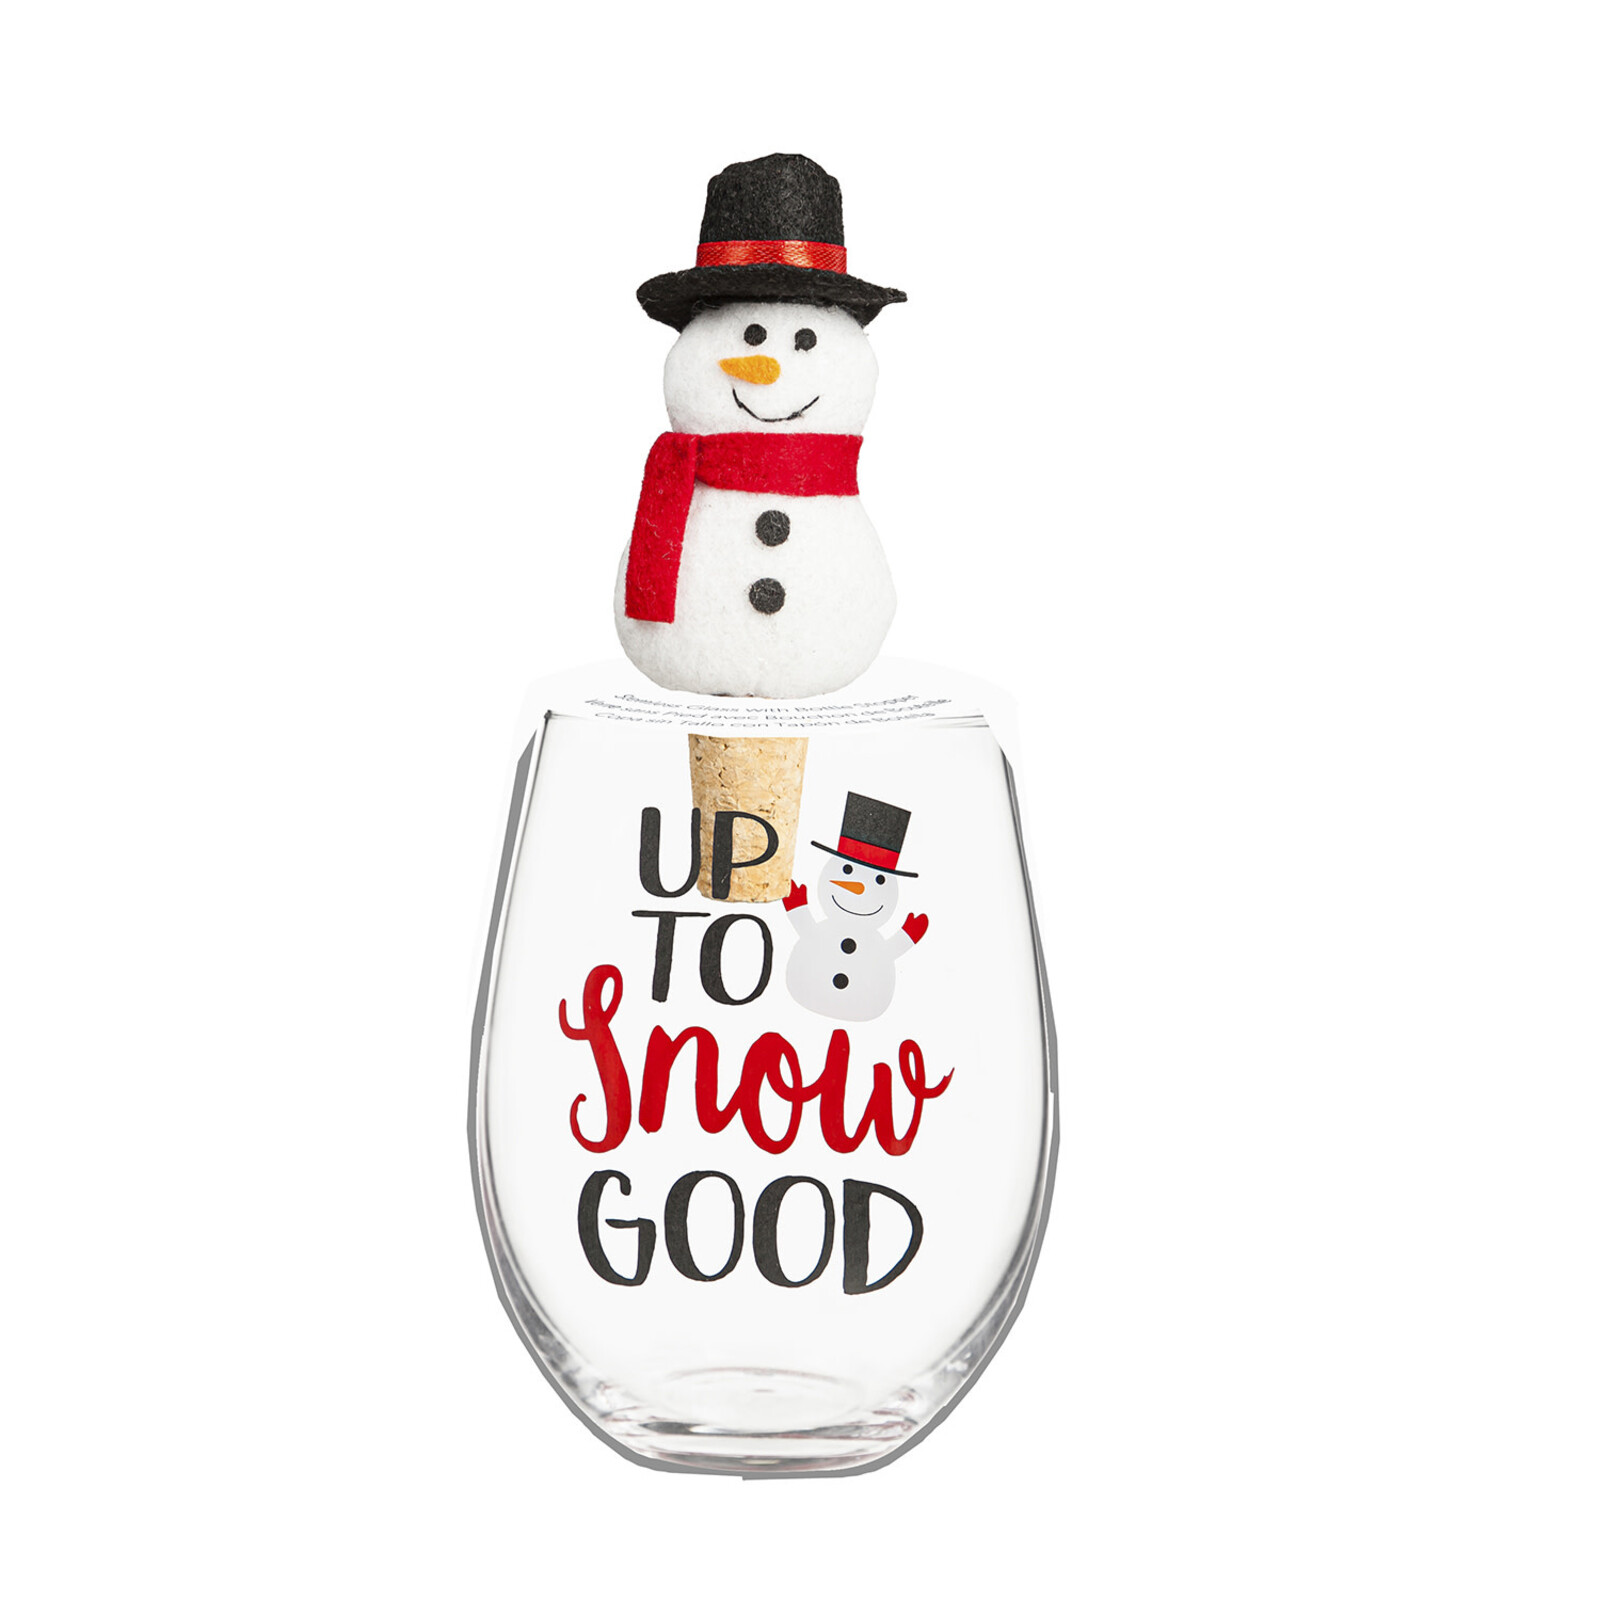 17 OZ Glass with Snowman Cork Wine Stopper Gift Set    P4213003 loading=